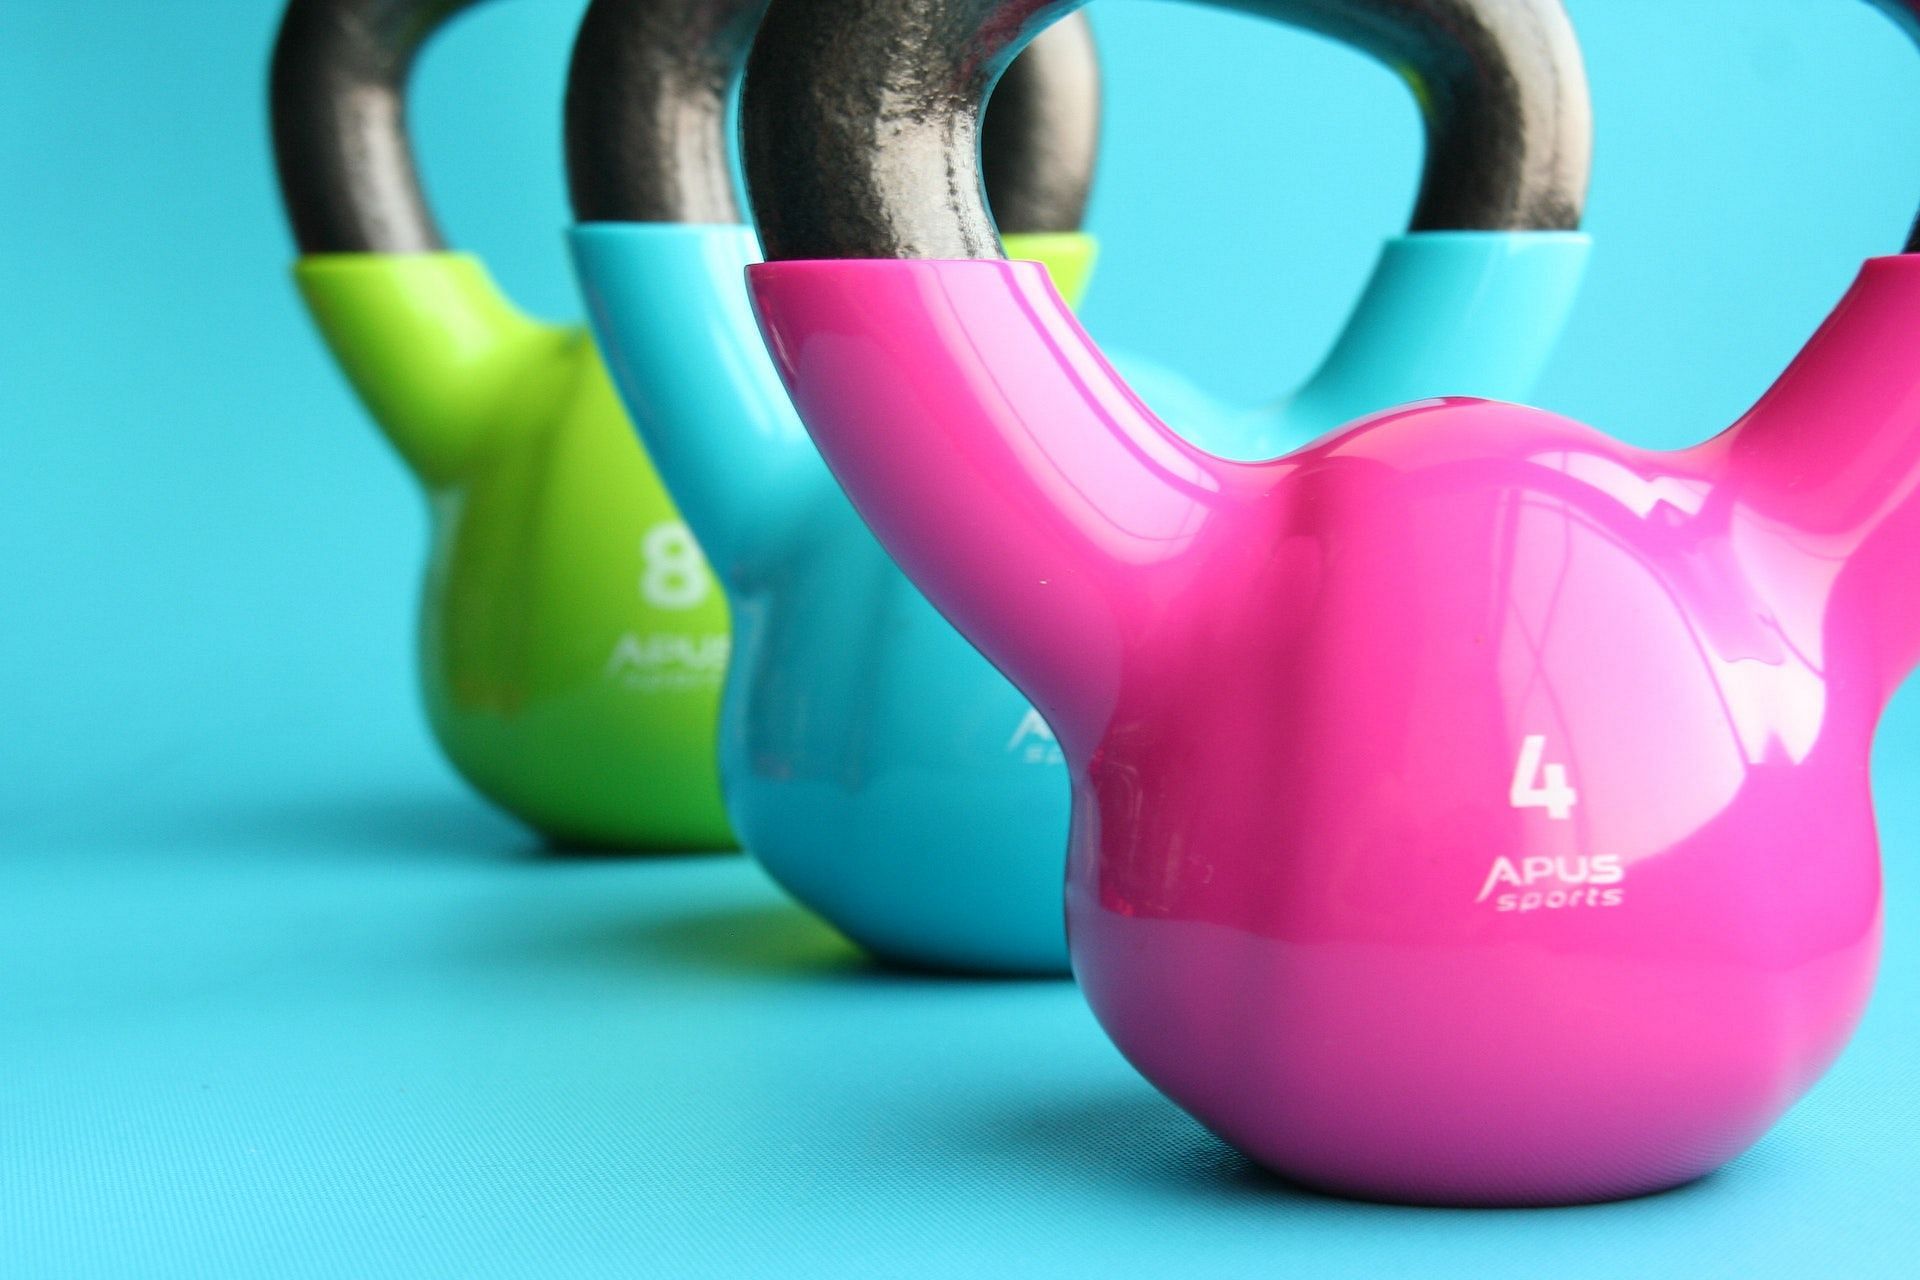 Full-body kettlebell workouts target several muscles at once.  (Photo via Pexels/Pixabay)